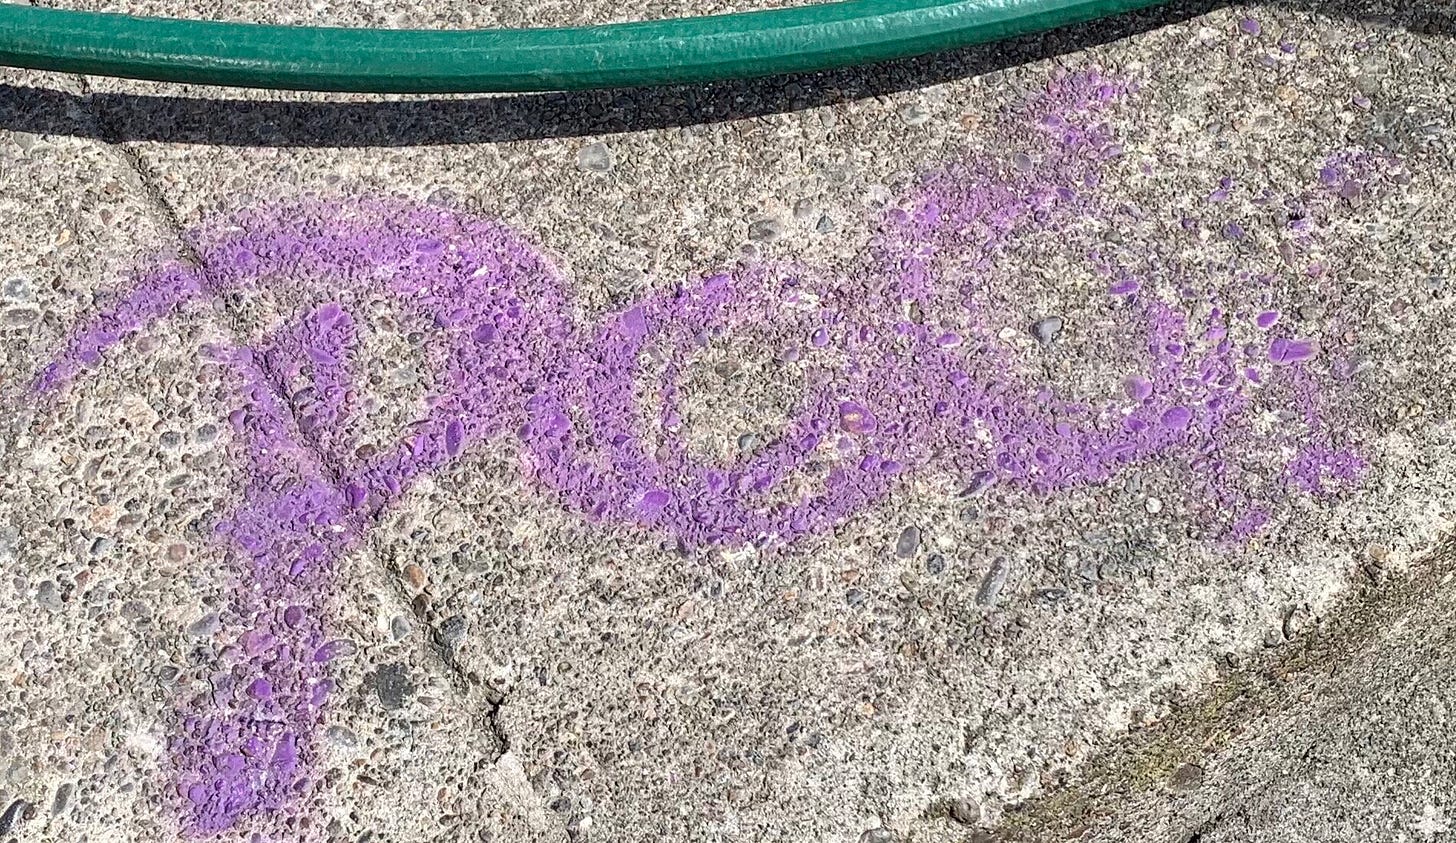 The word "poo" spray painted in purple on the cement and, above it, a green water hose